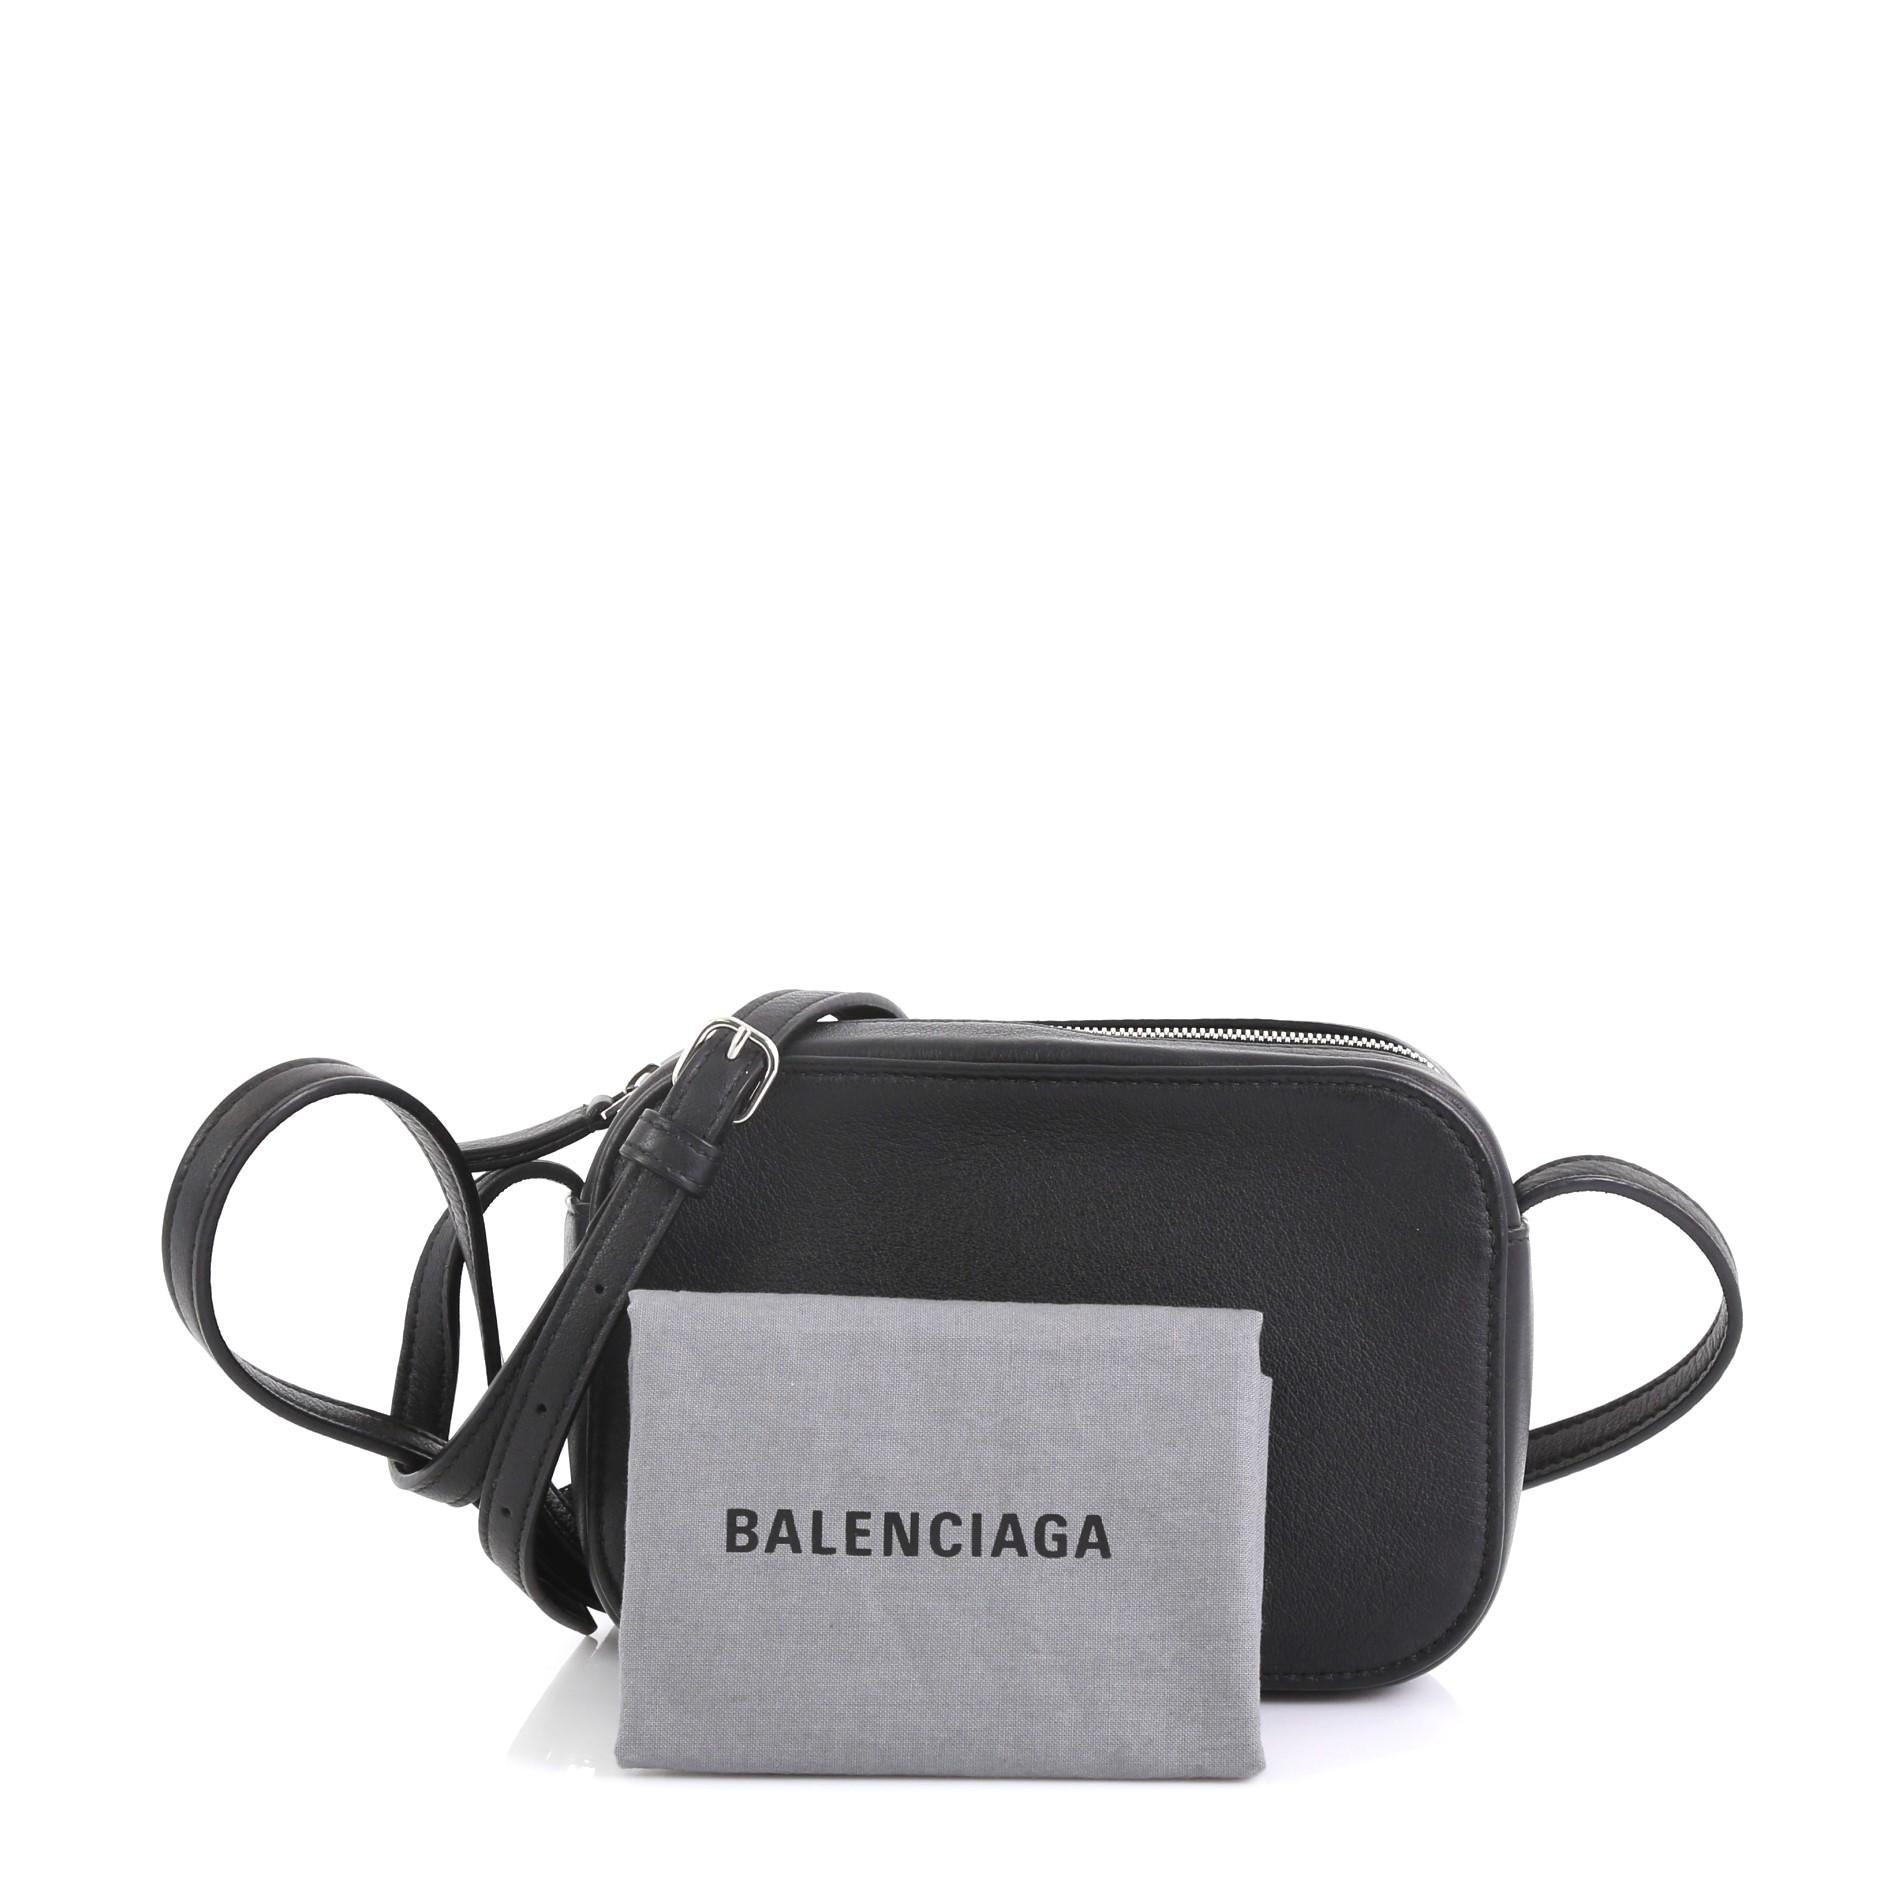 This Balenciaga Everyday Crossbody Bag Leather XS, crafted from black leather, features an adjustable shoulder strap, exterior back pocket and silver-tone hardware. Its zip closure opens to a black leather interior. 

Estimated Retail Price: